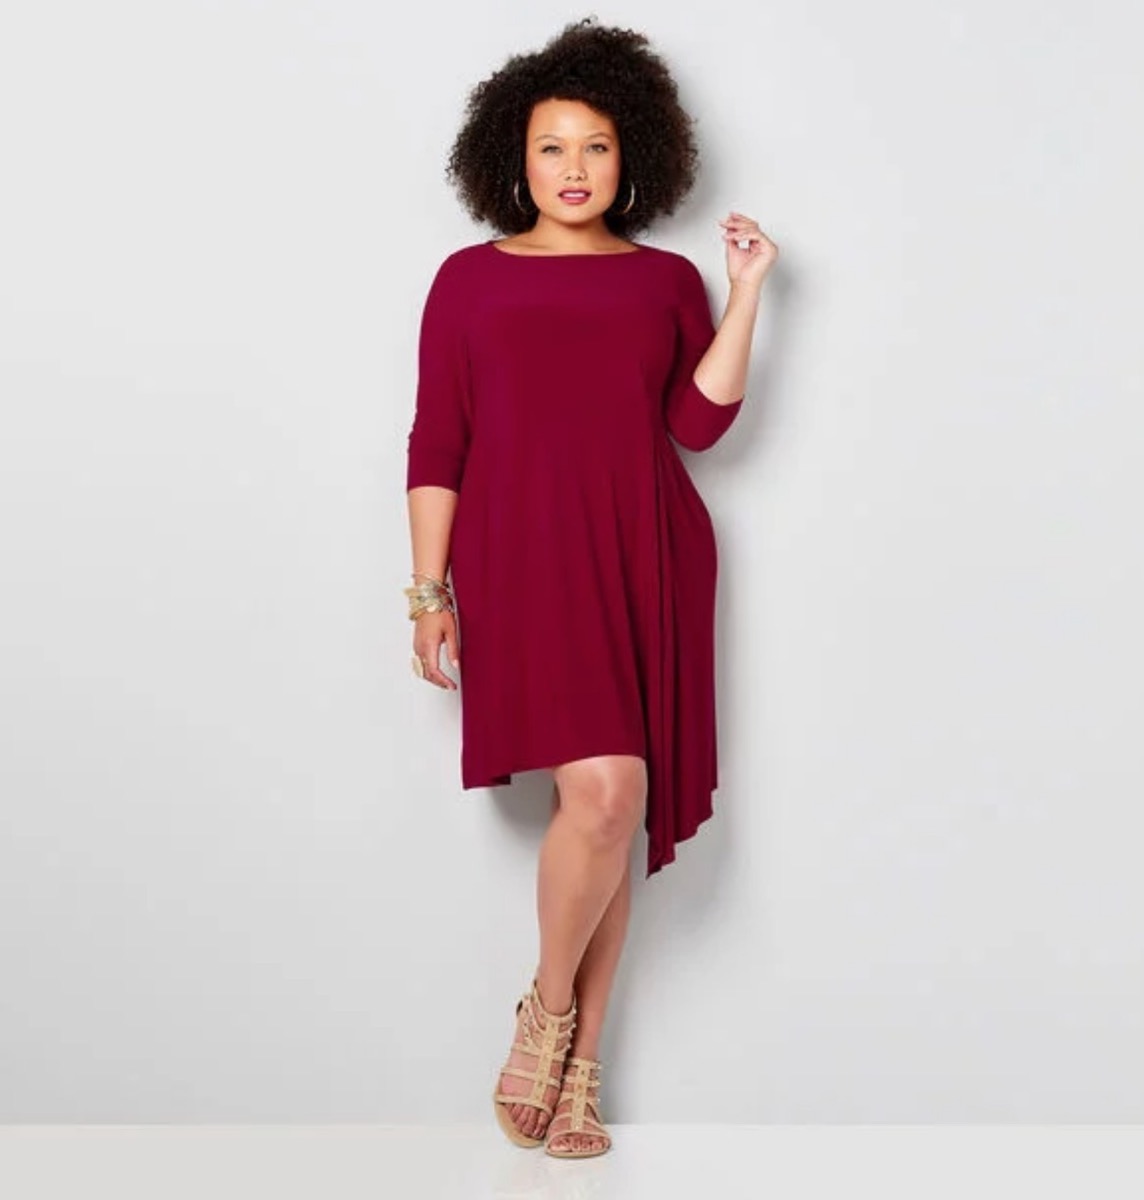 woman wearing knee length burgundy dress against gray background, fall dresses